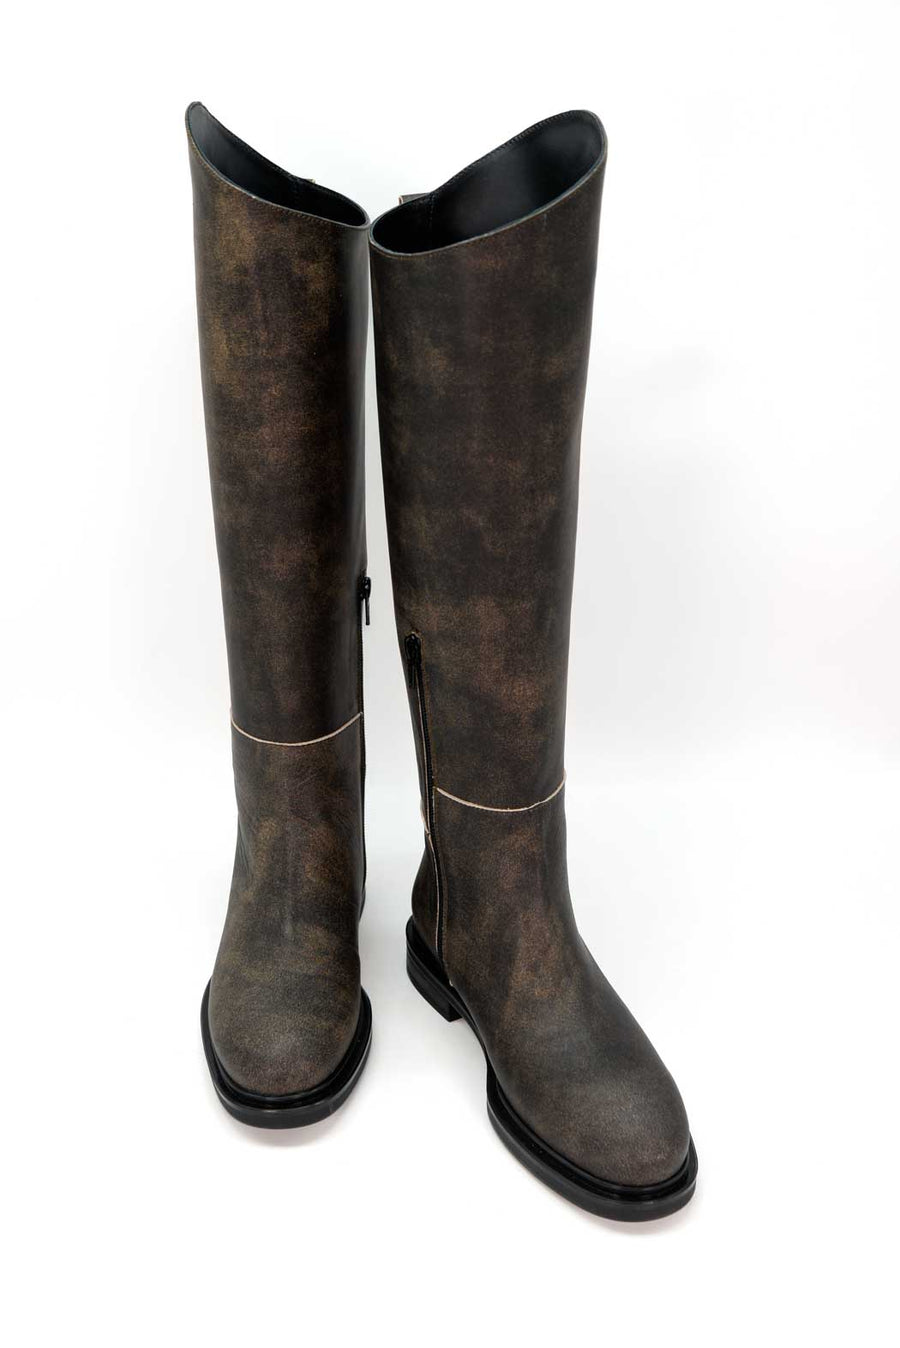 FMJ20 VINTAGE-EFFECT LEATHER TALL BOOTS